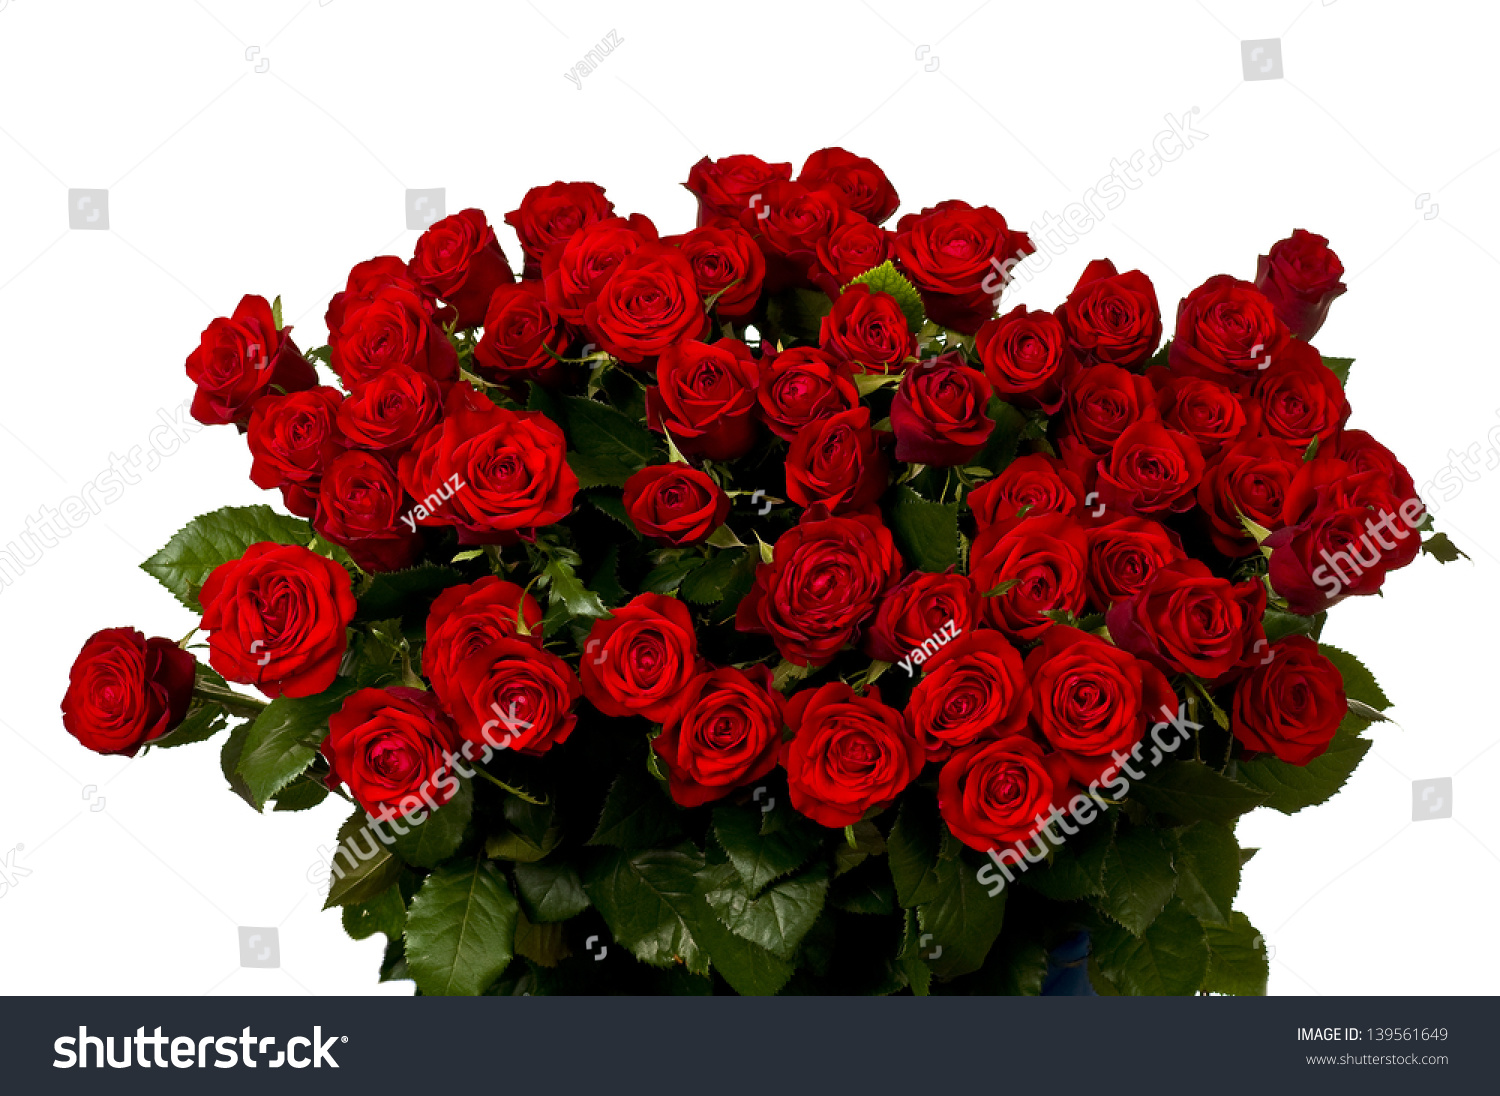 Red Roses A Huge Bouquet Of Flowers Stock Photo 139561649 Shutterstock